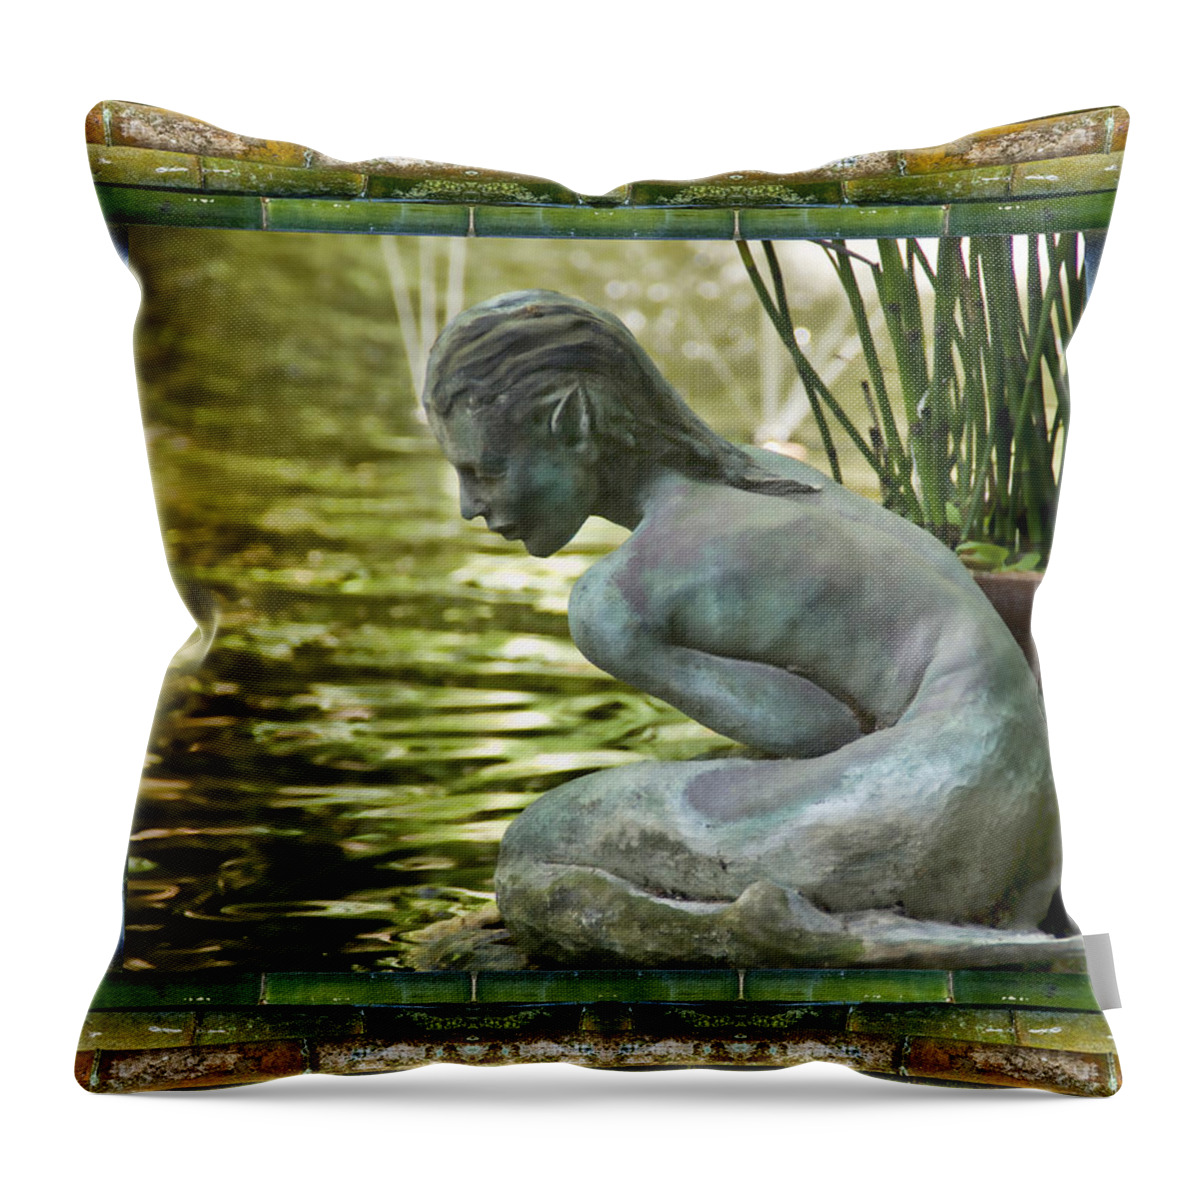 Mandalas Throw Pillow featuring the photograph Looking In by Bell And Todd